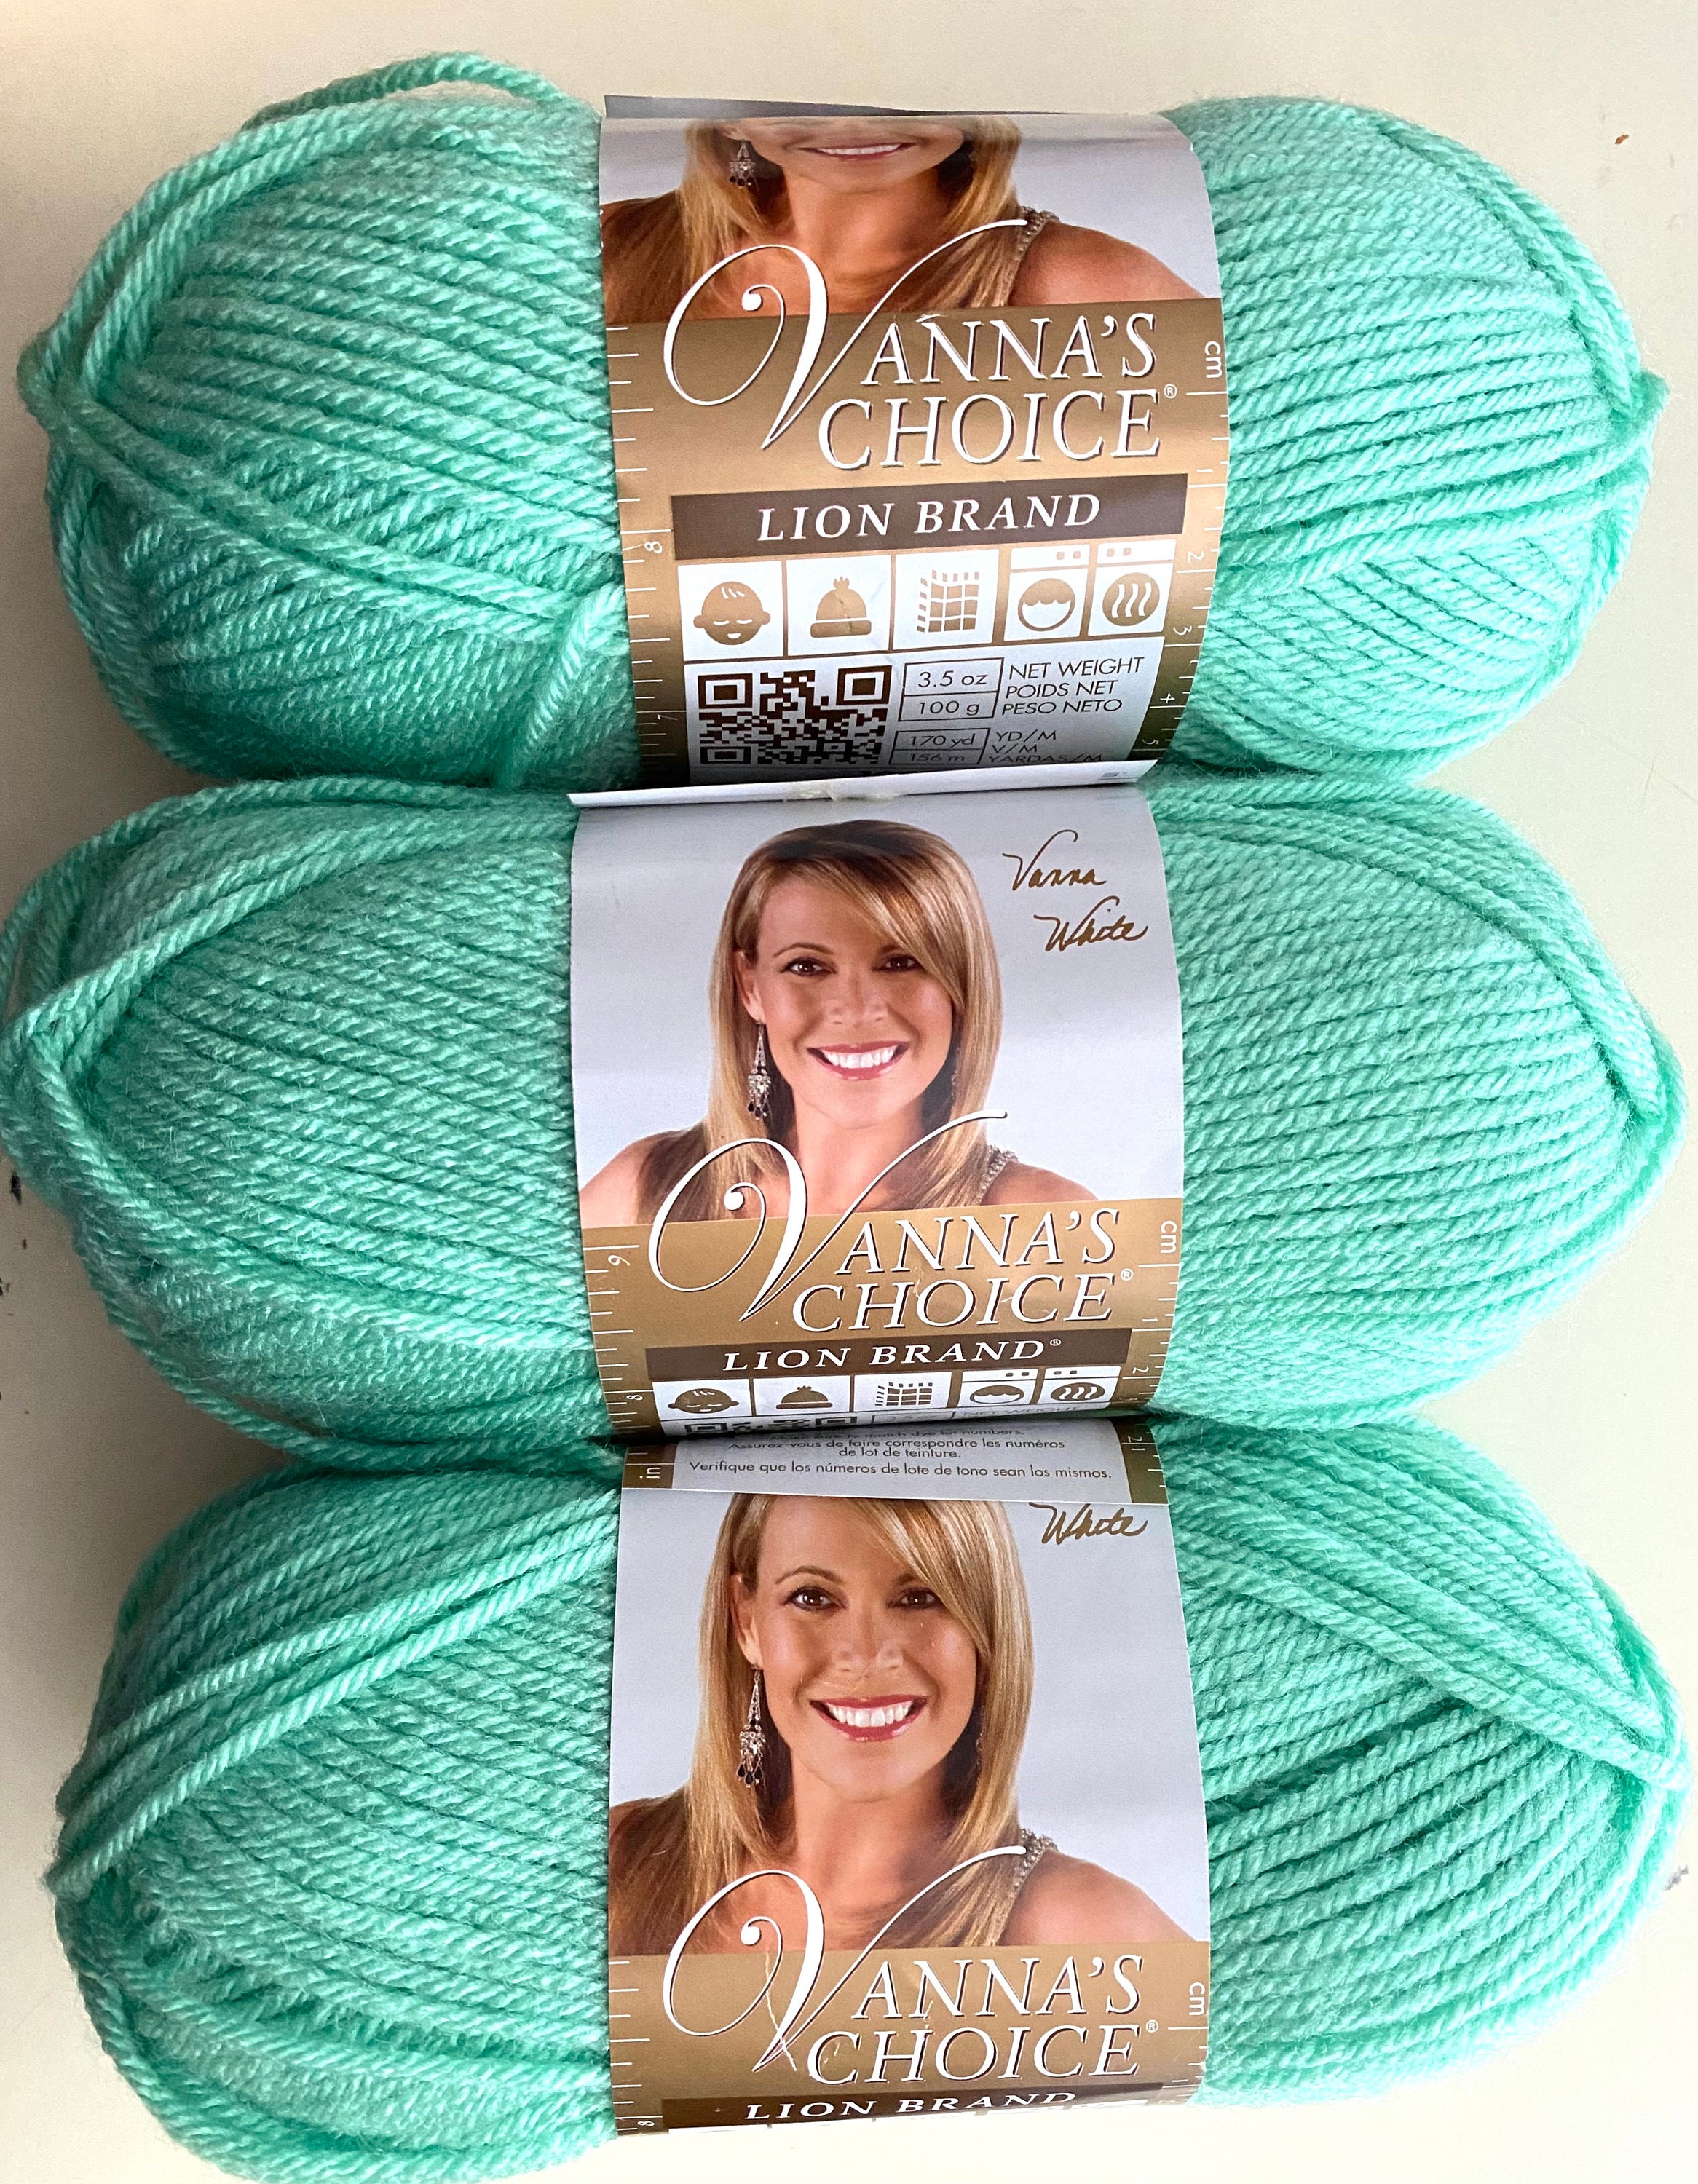 Lion Brand Yarn lion brand 24/7 cotton yarn, yarn for knitting, crocheting,  and crafts, mint, 3 pack